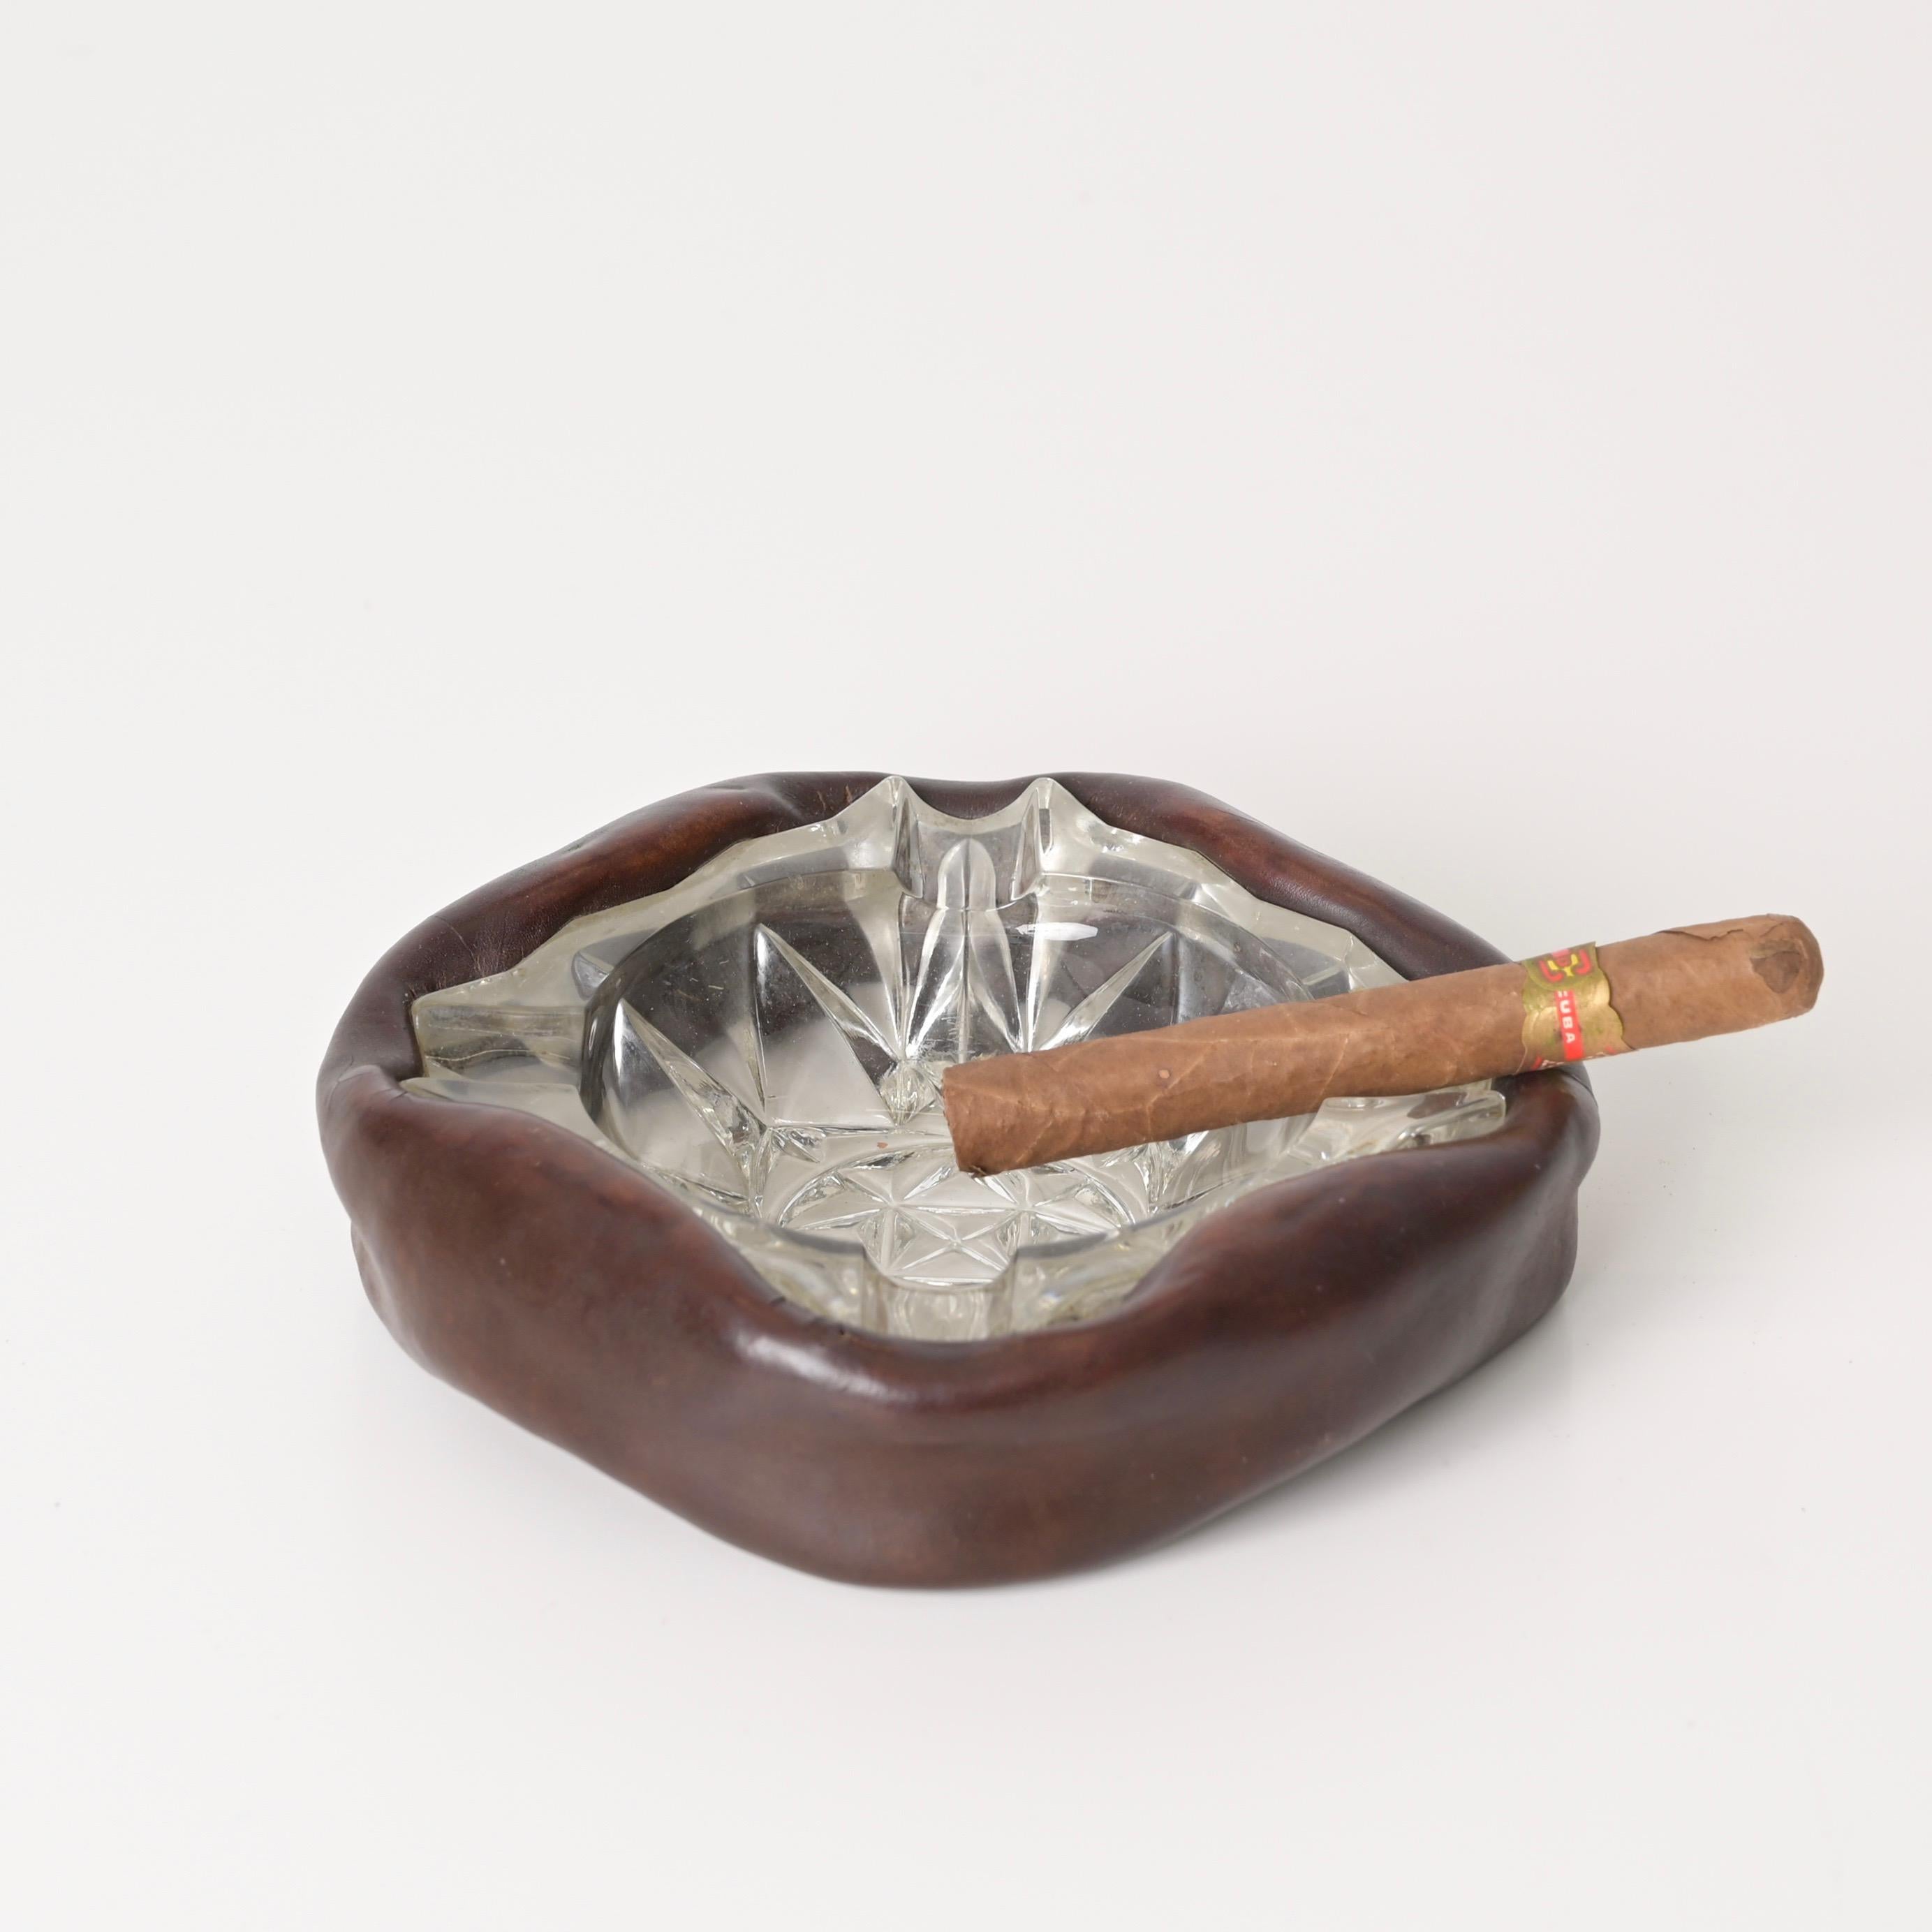 Jacques Adnet Bent Leather and Cut Crystal French Ashtray, 1960s For Sale 6